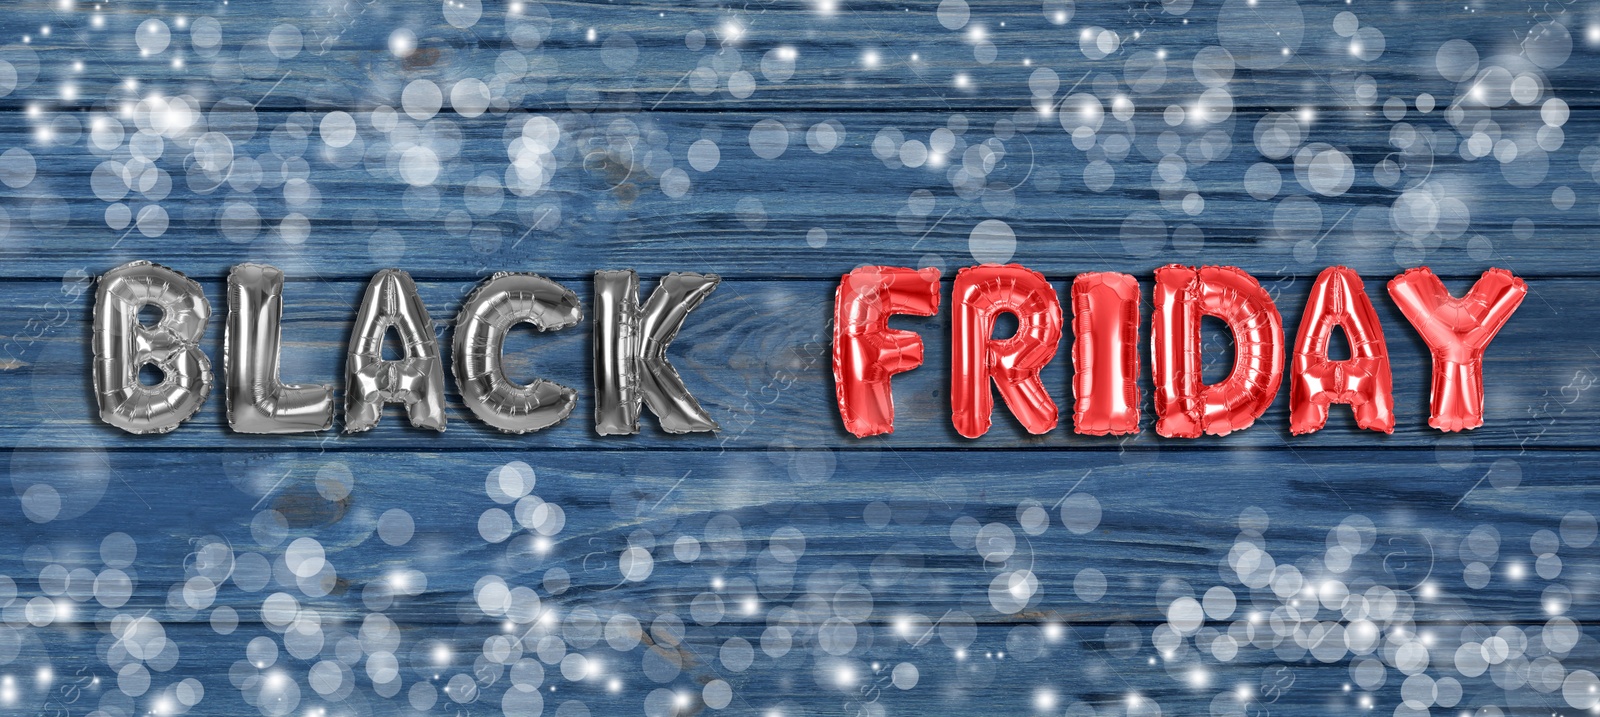 Image of Phrase BLACK FRIDAY made of foil balloon letters on blue wooden background. Banner design